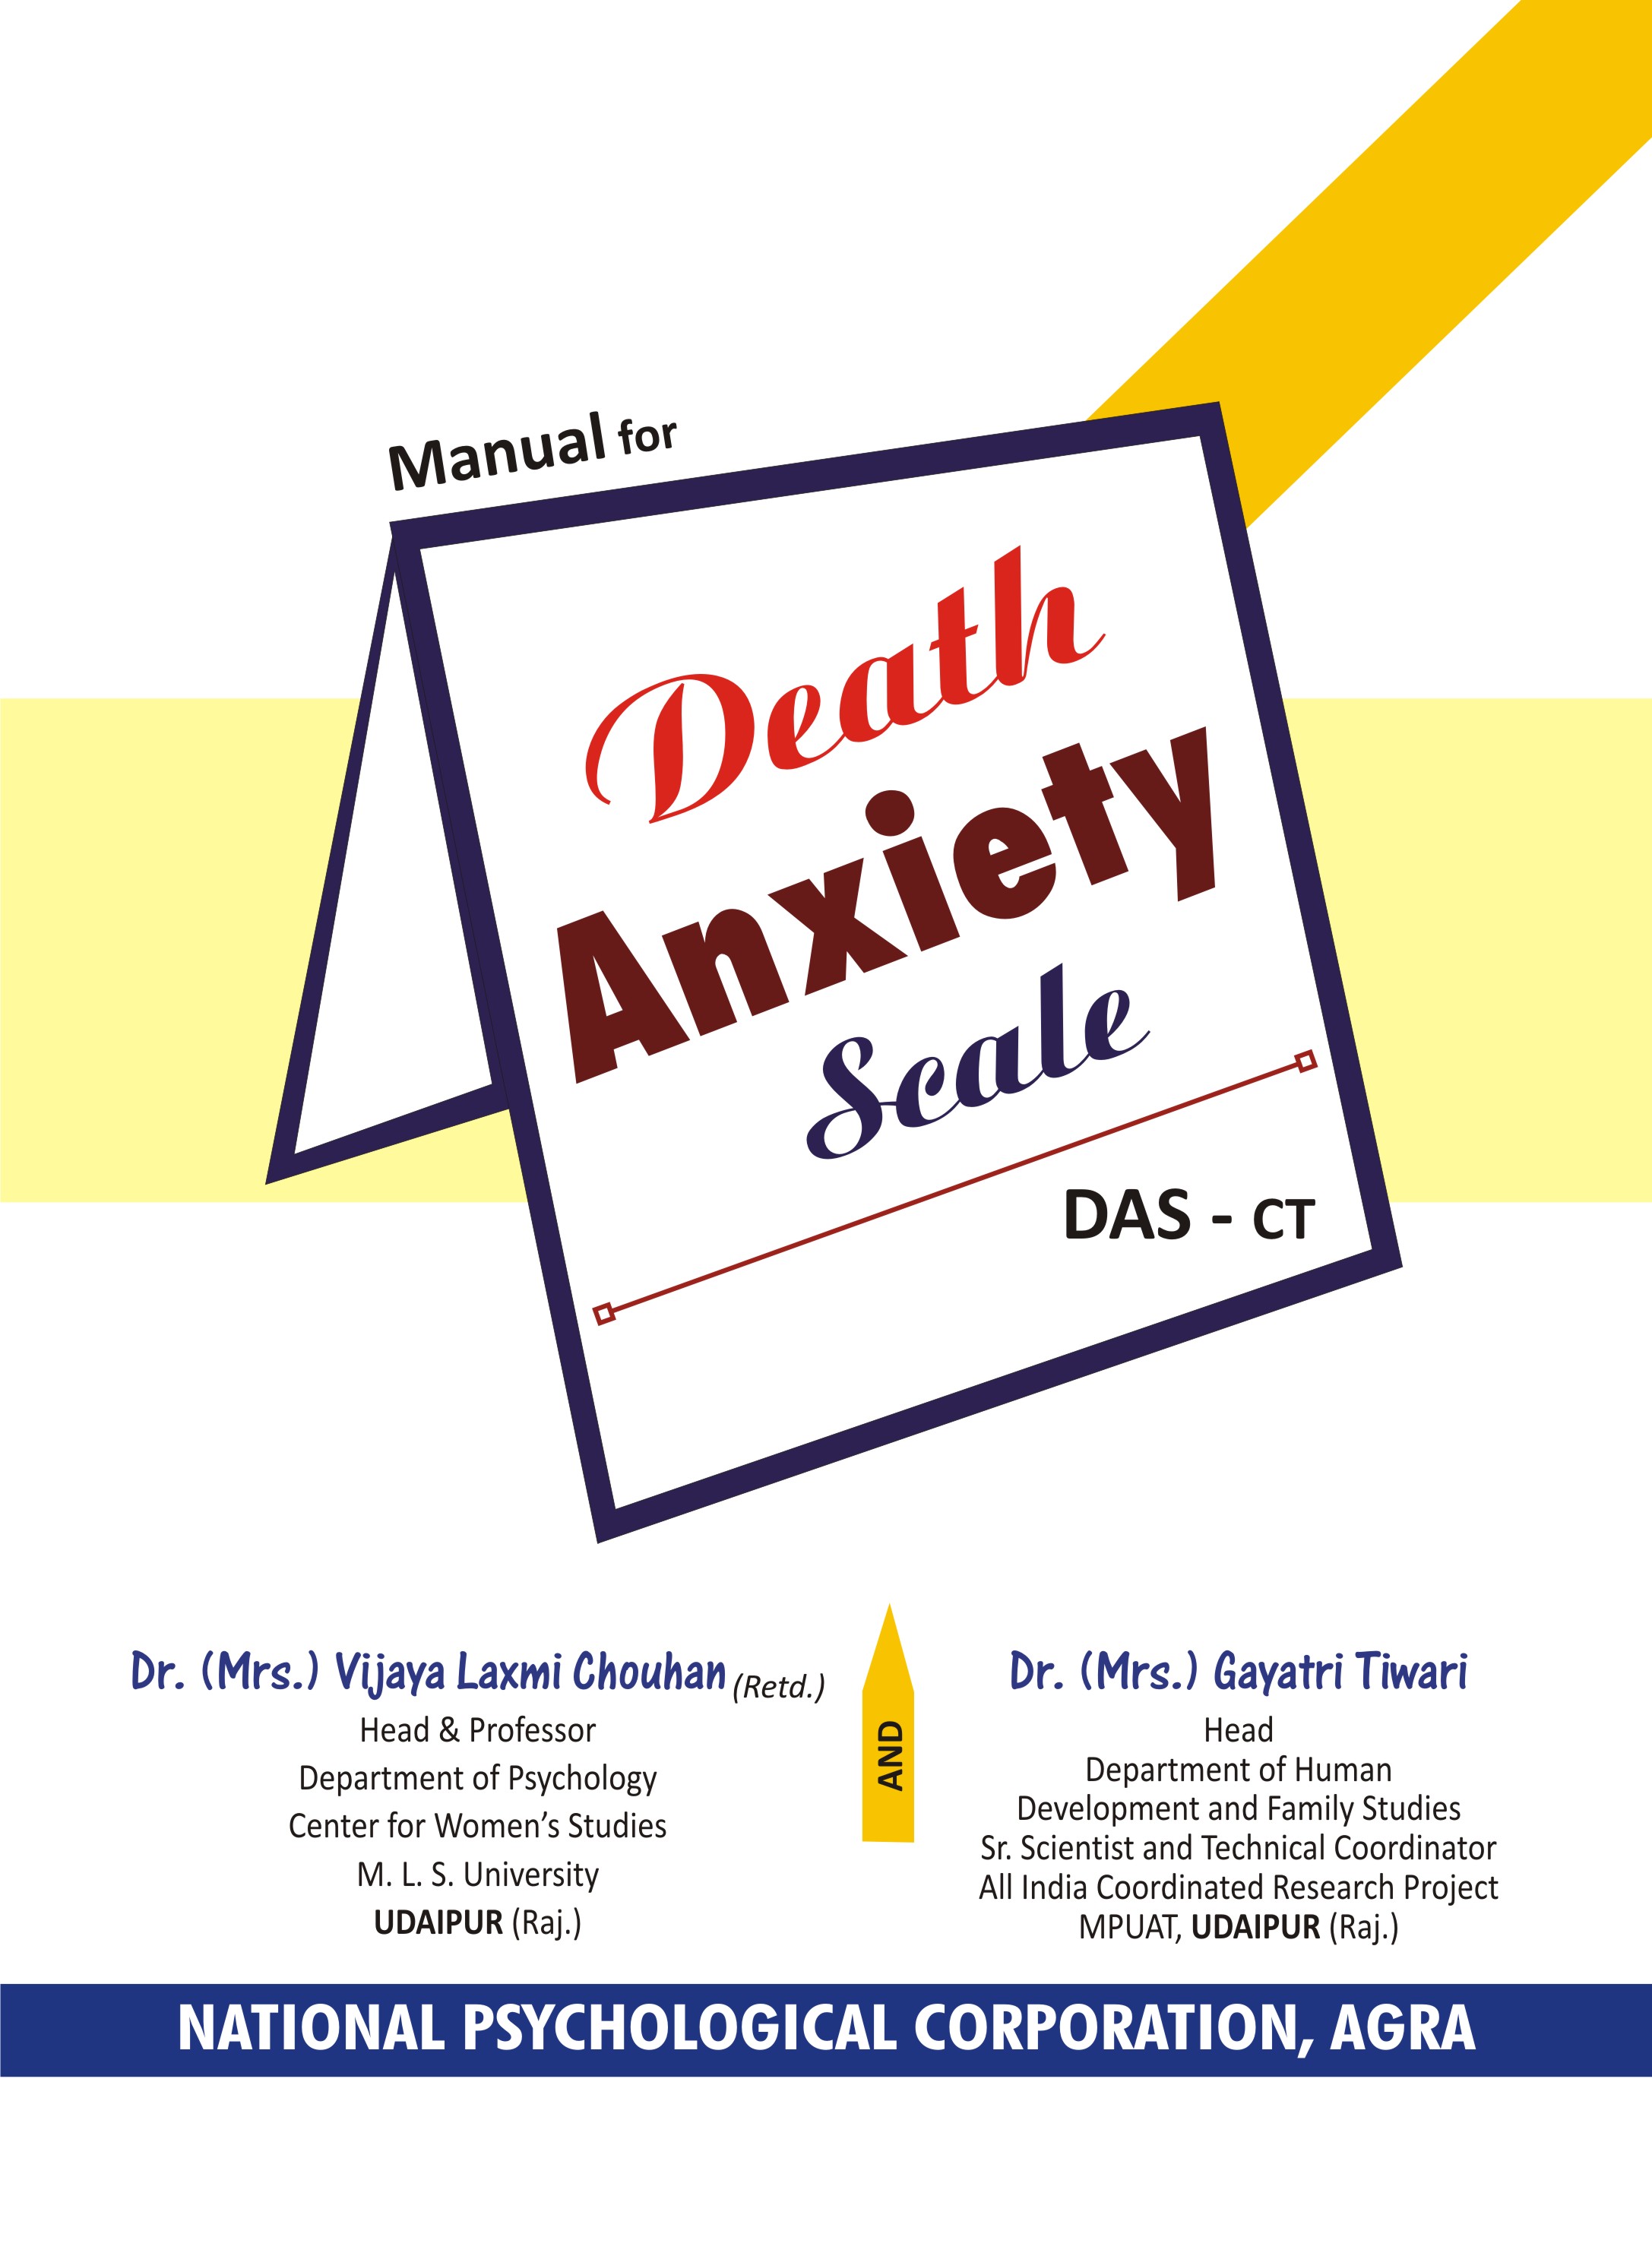 DEATH-ANXIETY-SCALE